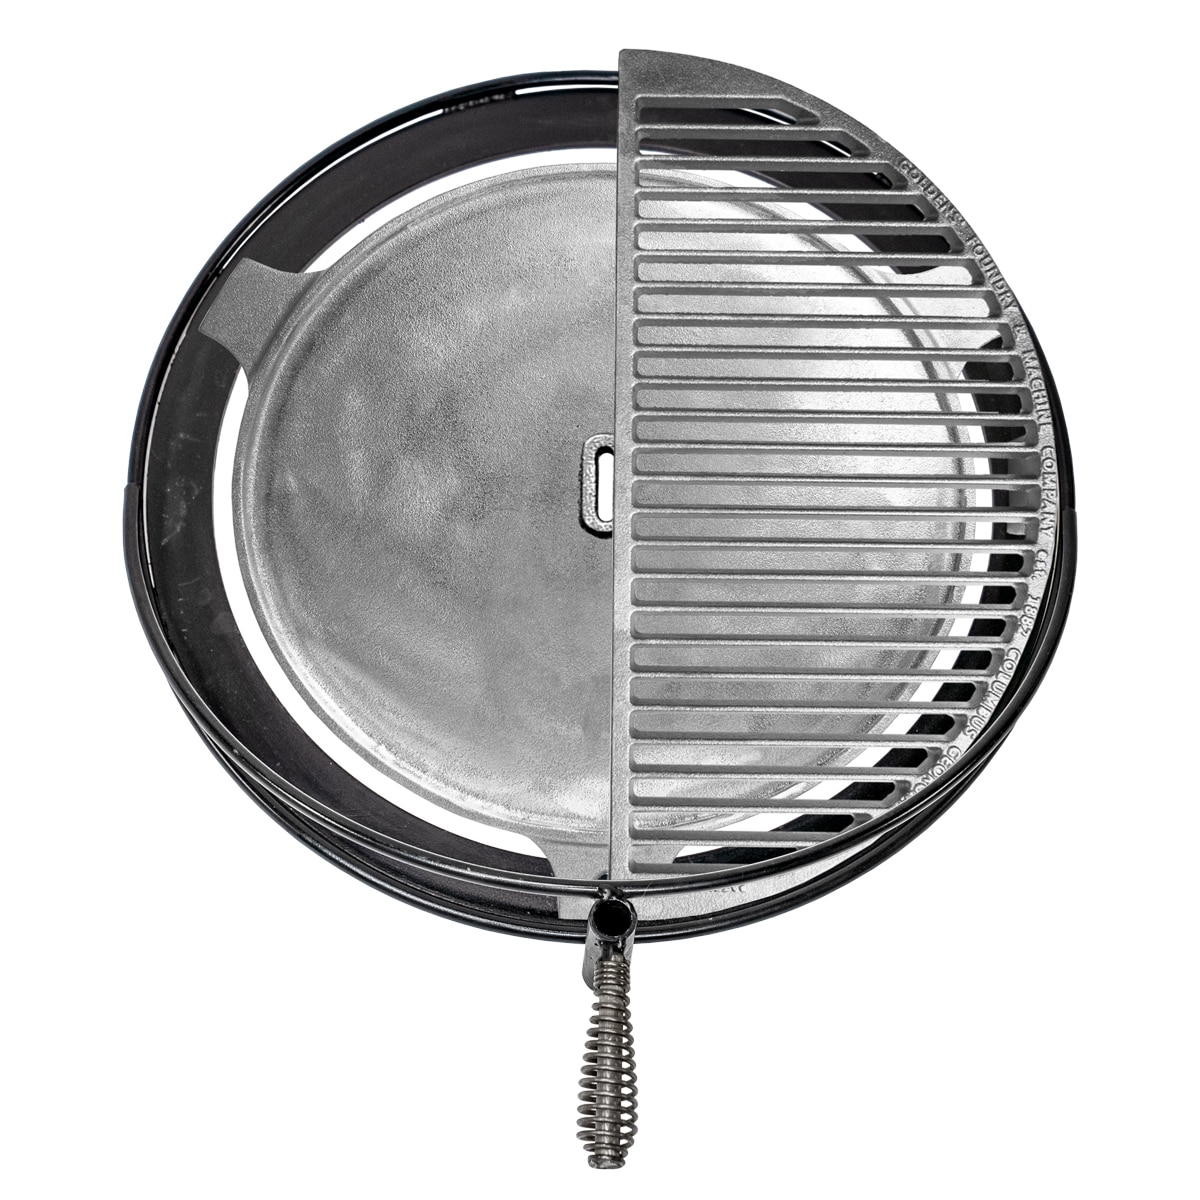 Fire Pit Cooking System Large 20.5" Shelf w/Searing Plate